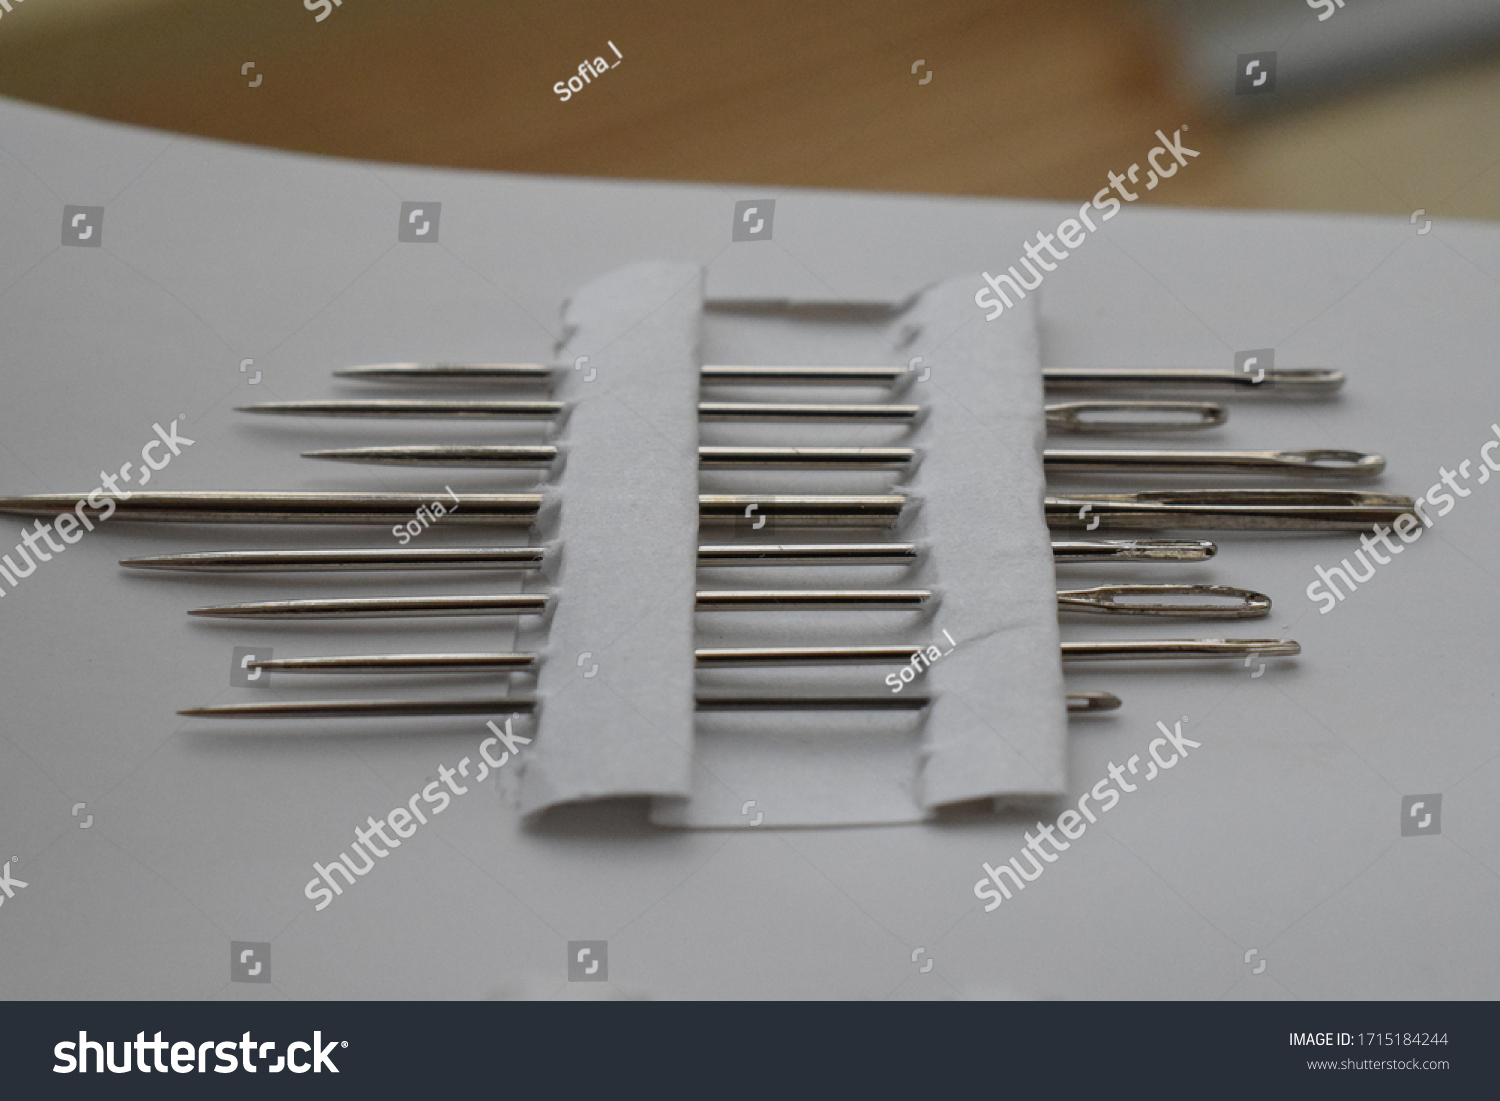 A set of sewing needles on a white background. #1715184244